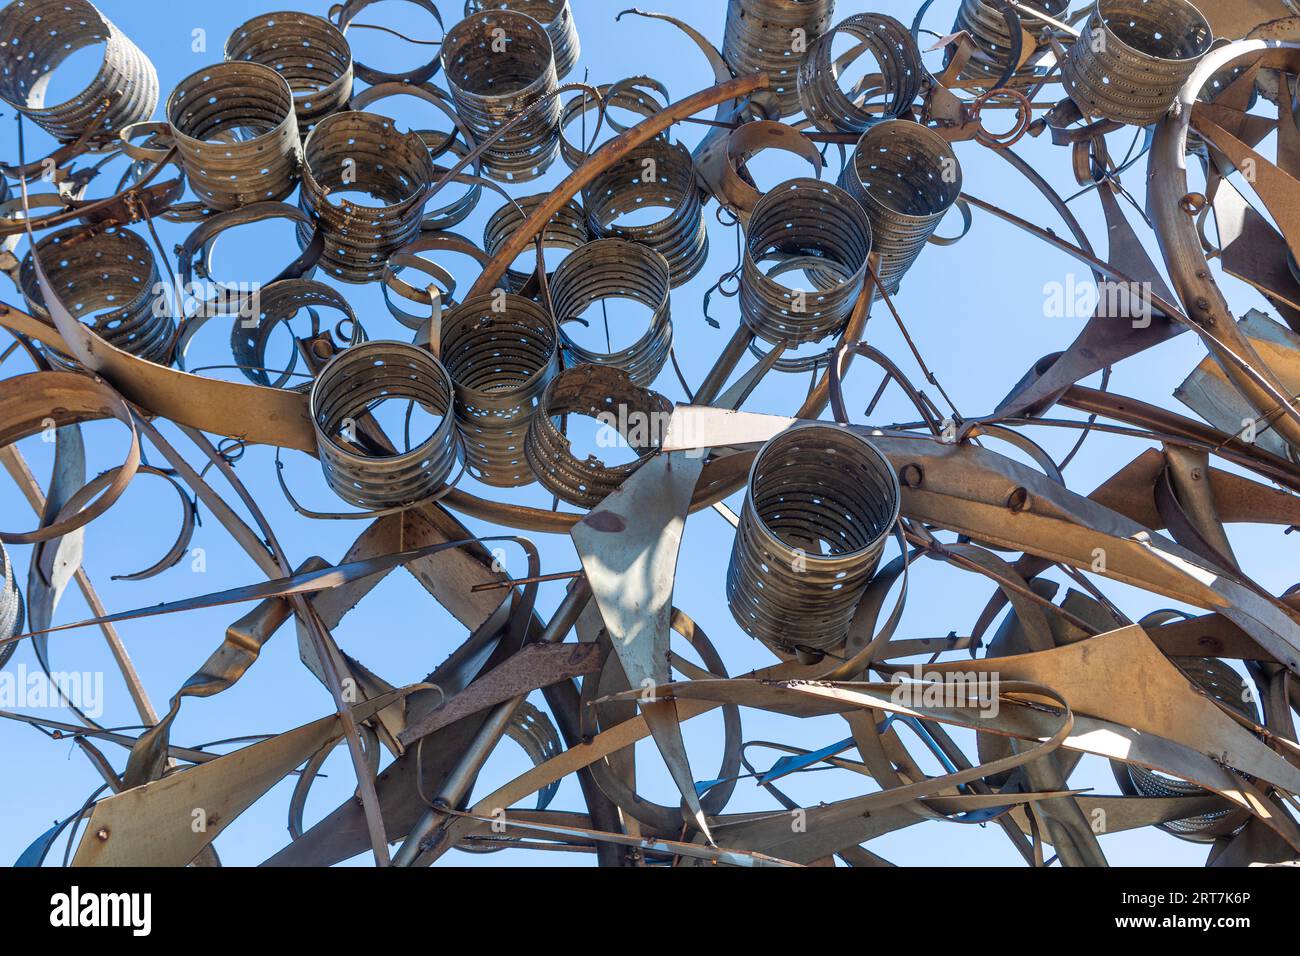 An abstract metal fine art sculpture in Le Barcares, South of France against a clear blue sky Stock Photo